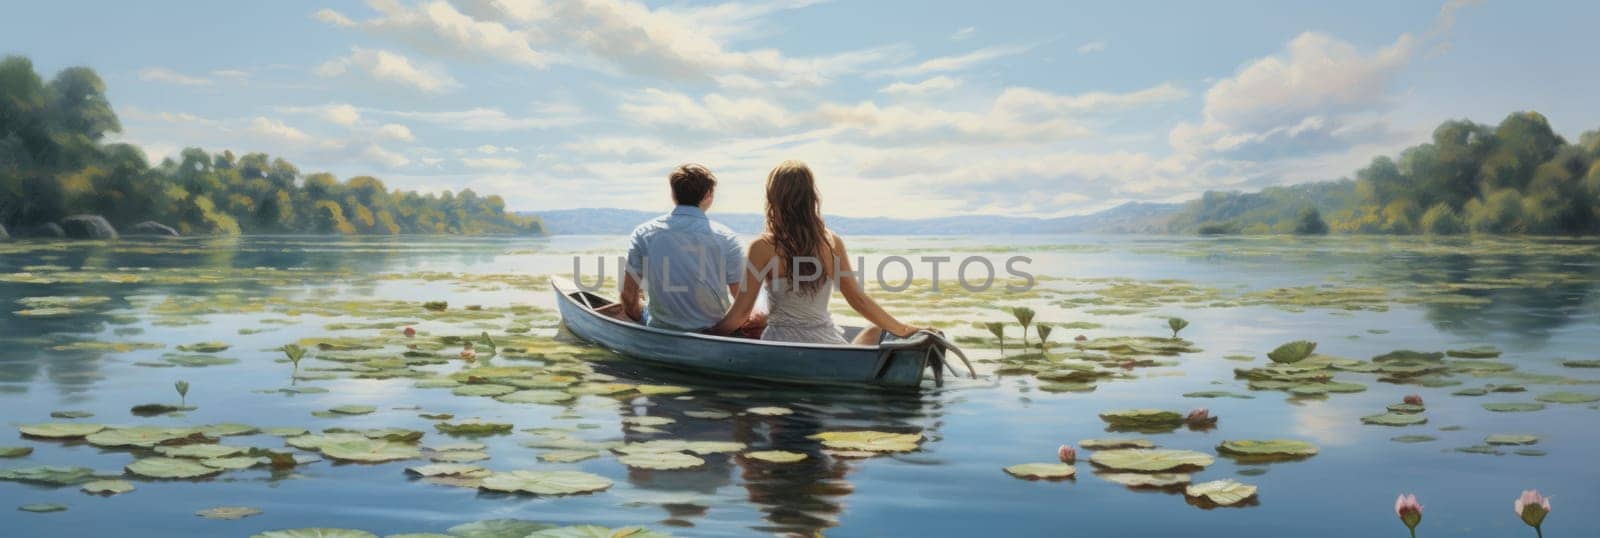 A painting depicting a couple in love seated in a boat on a tranquil lake.